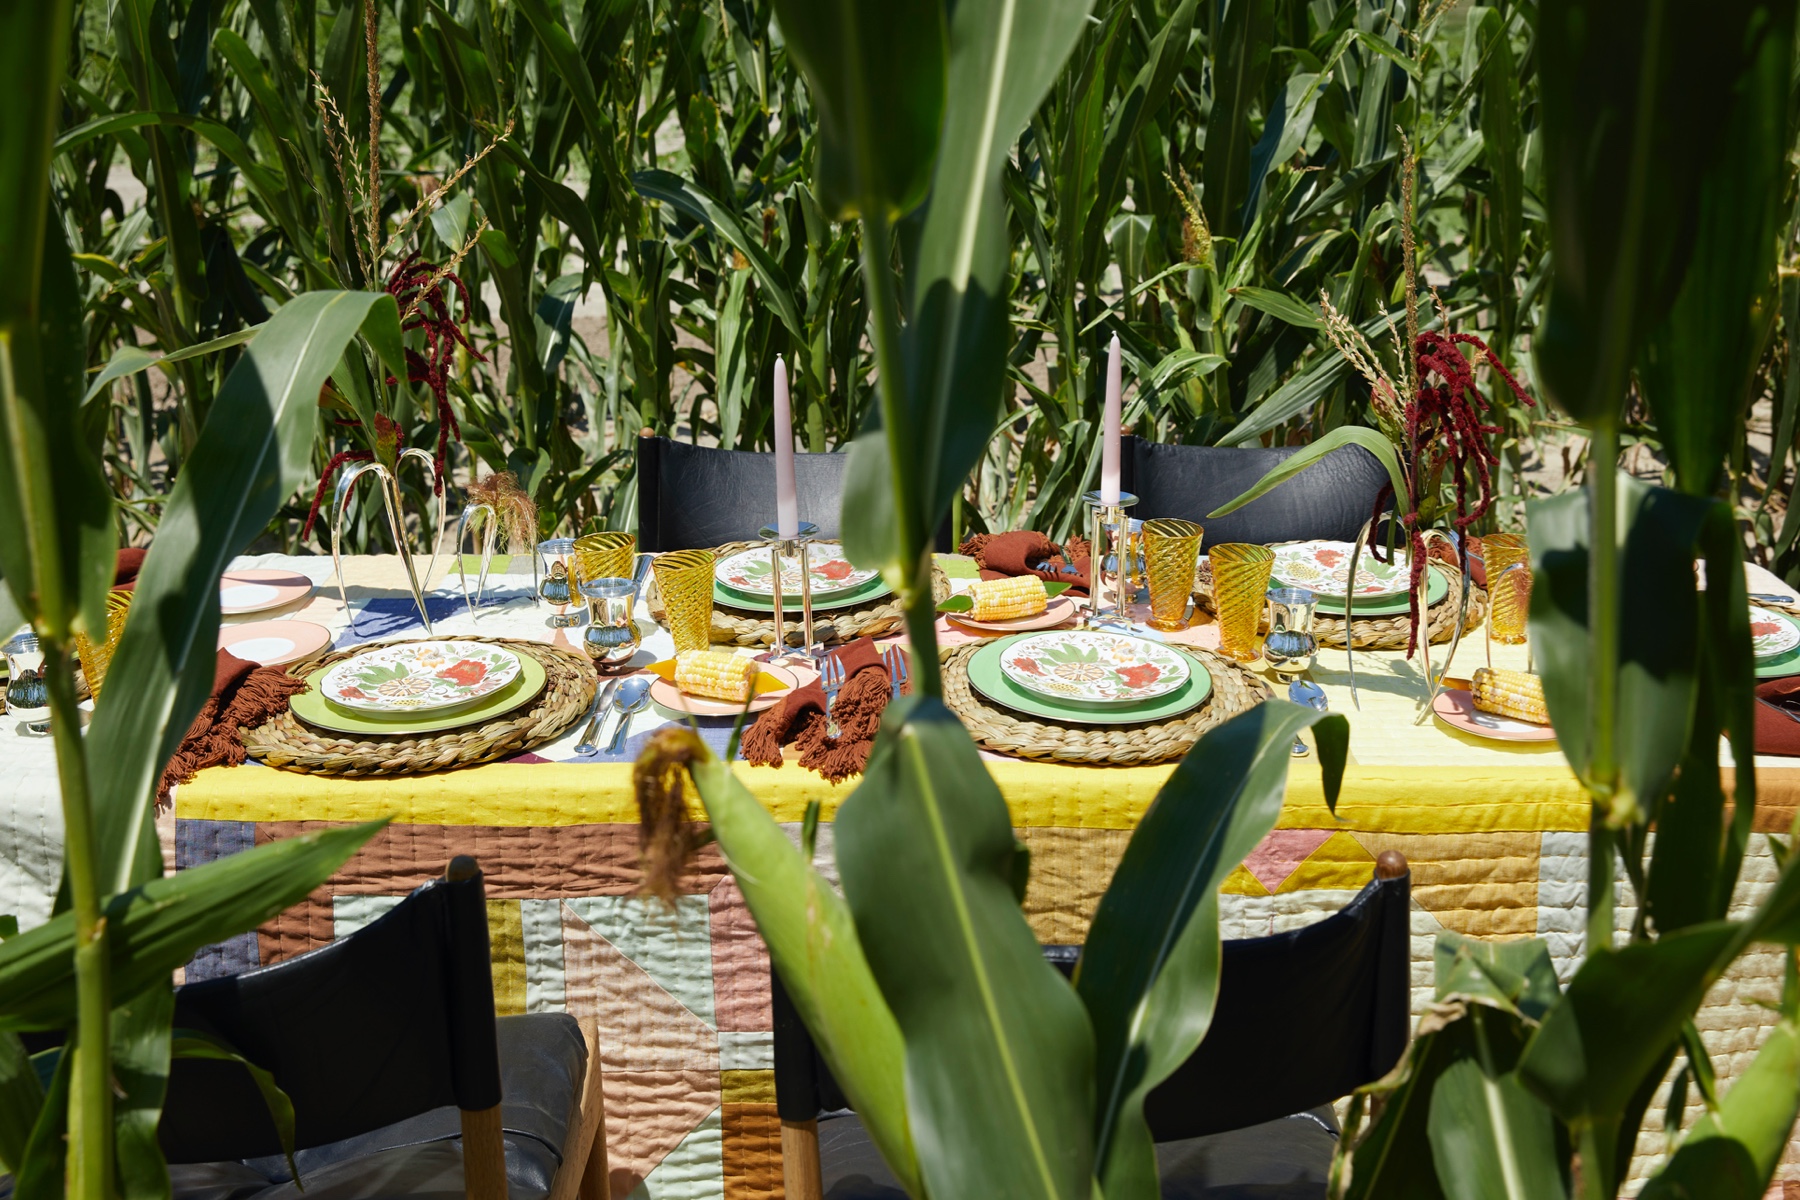 A Fall-themed table setting in a corn field.